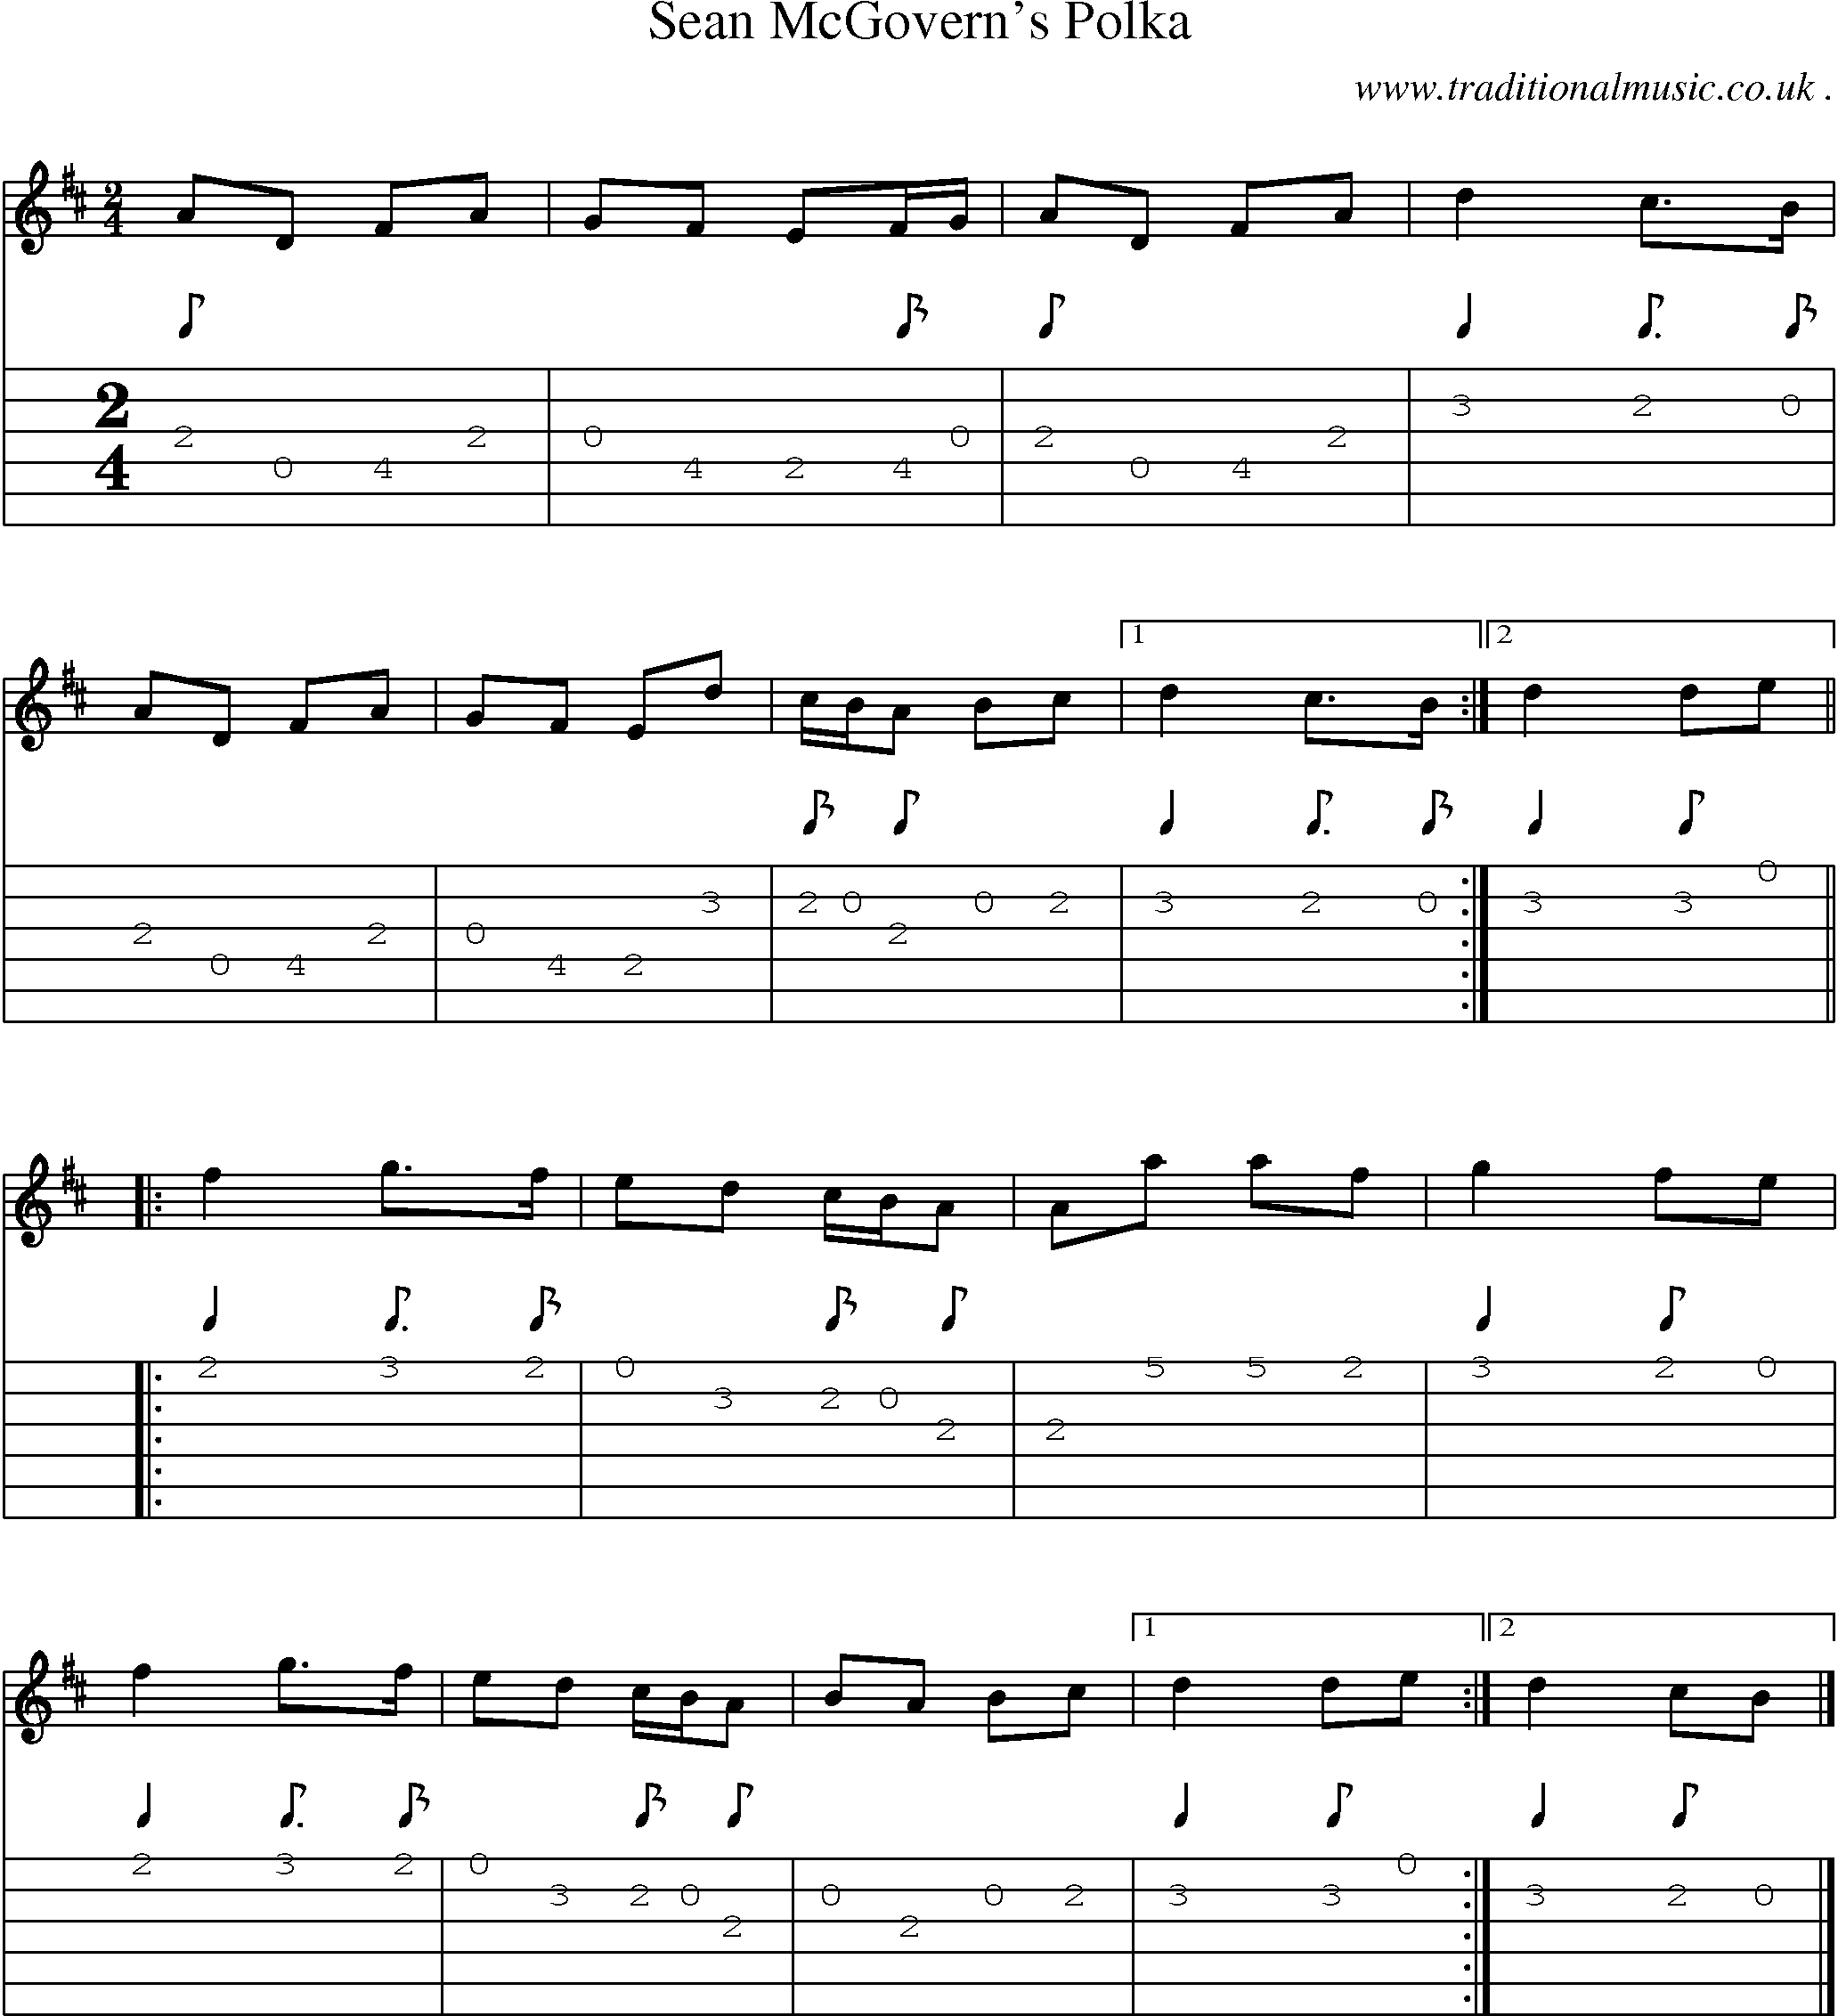 Sheet-music  score, Chords and Guitar Tabs for Sean Mcgoverns Polka